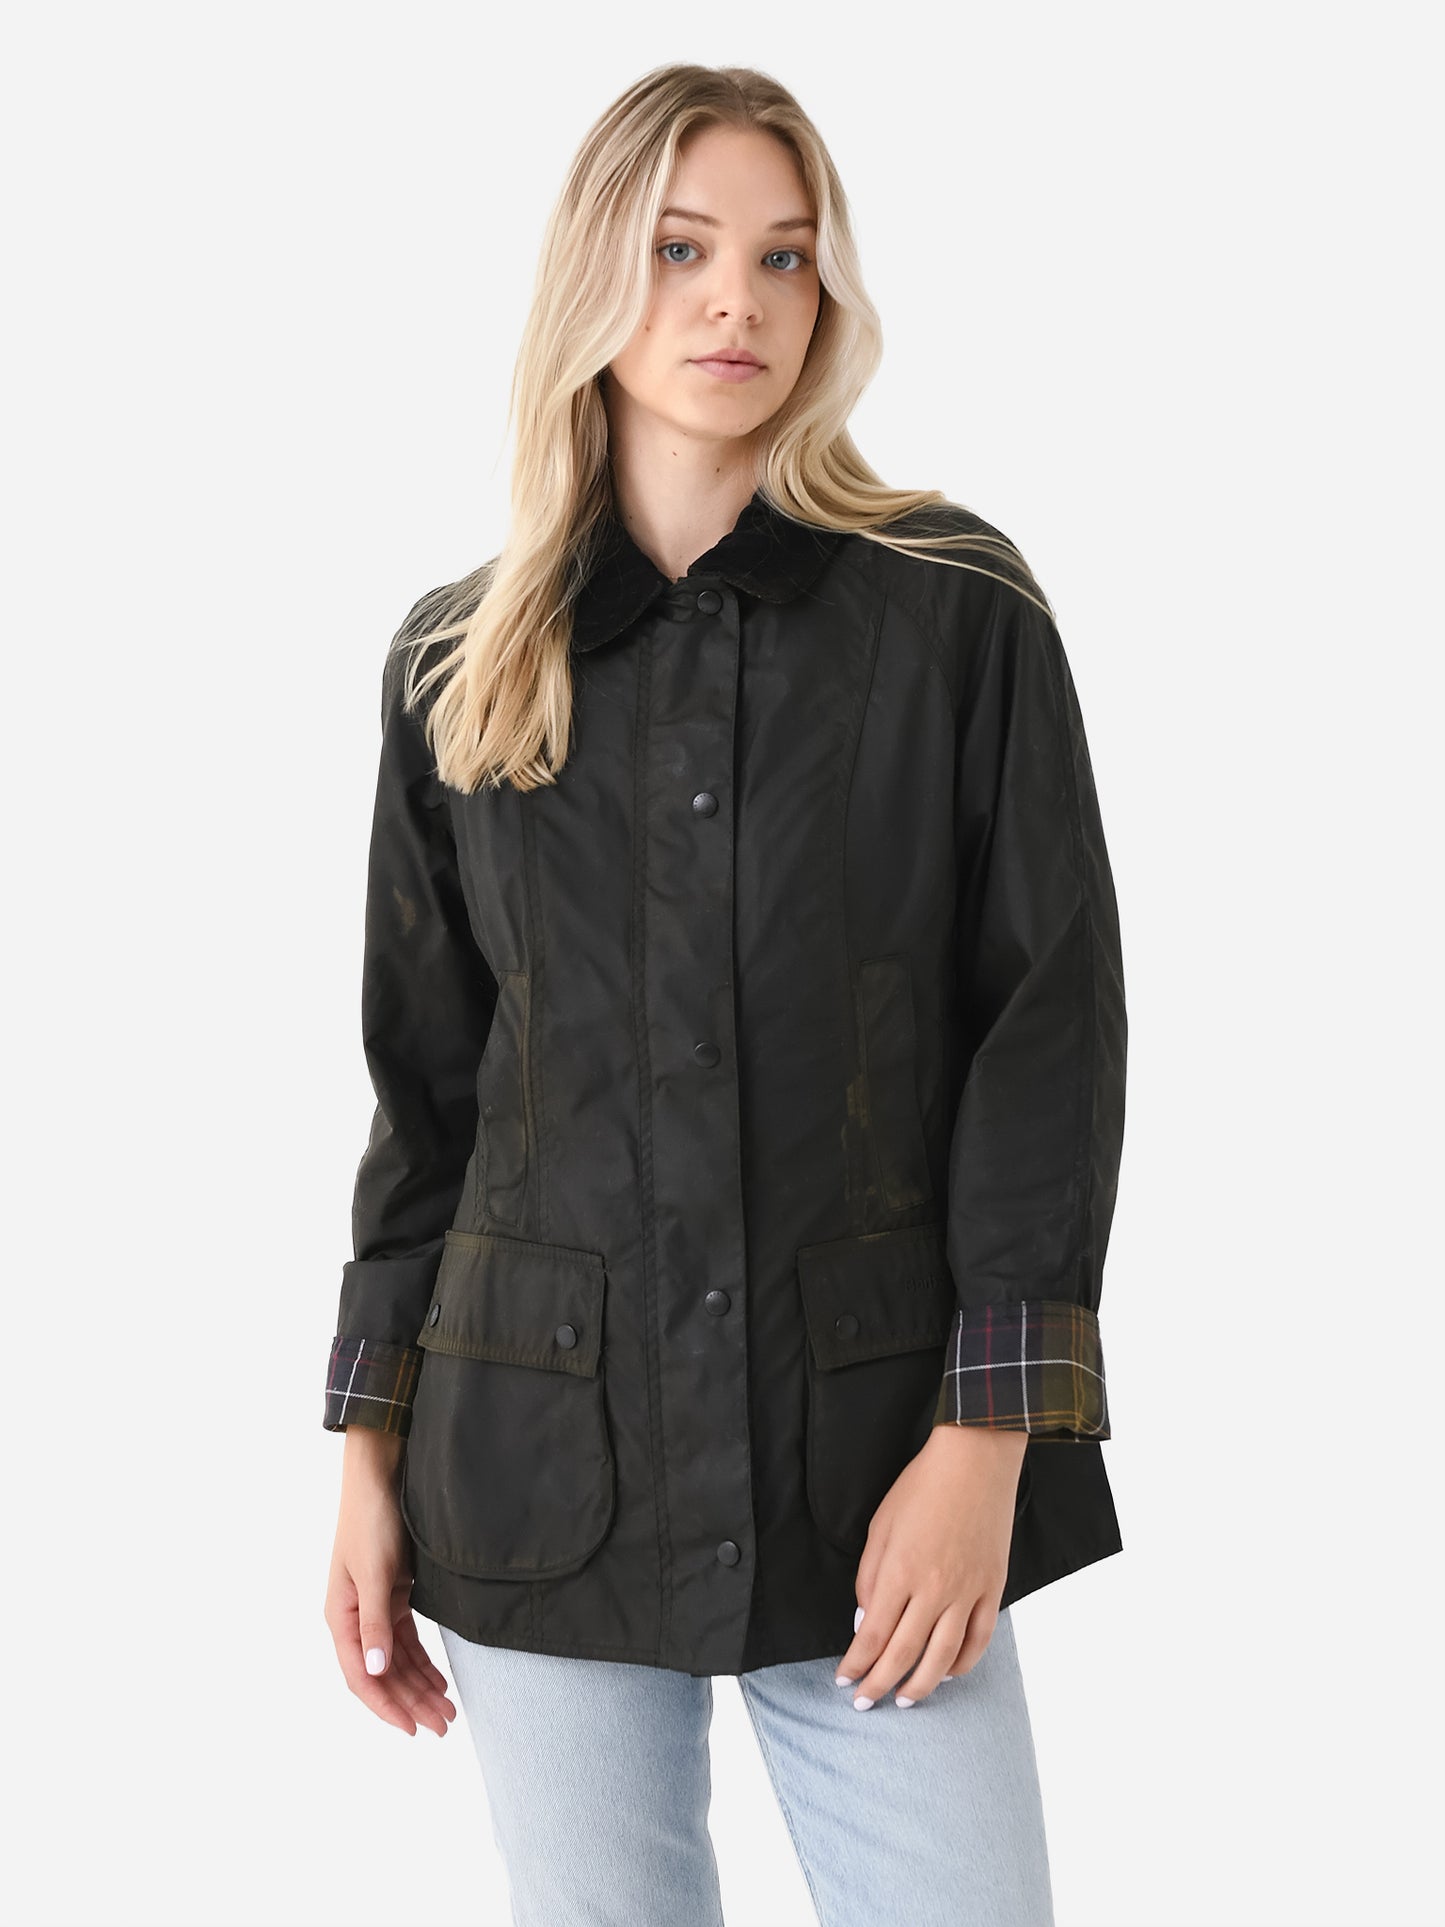 Barbour Women's Classic Beadnell Wax Jacket